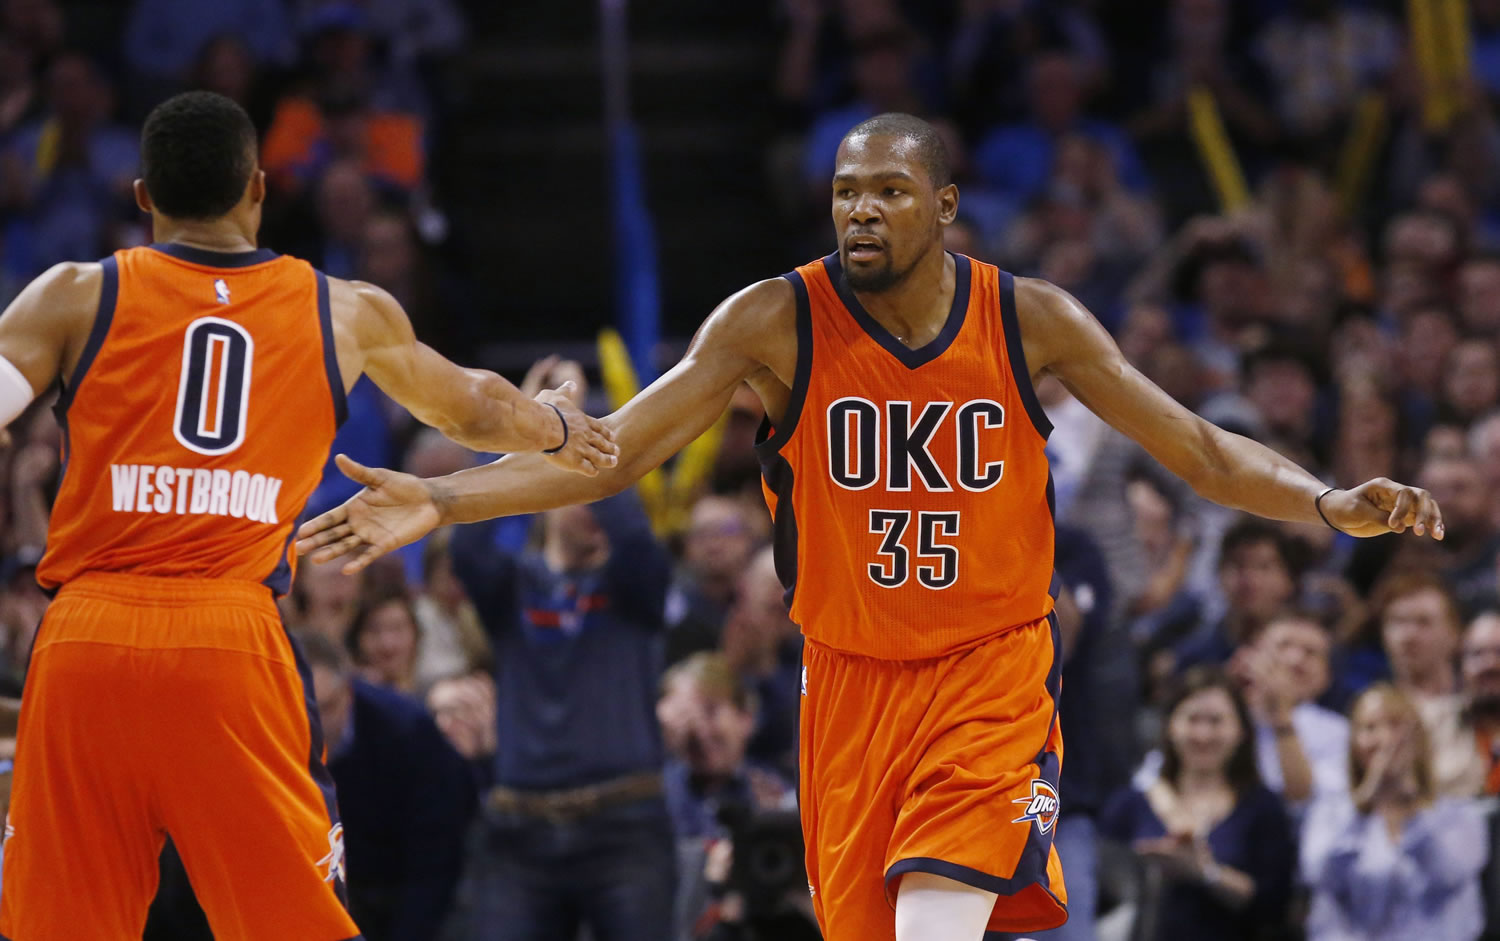 Oklahoma City Thunder forward Kevin Durant (35) slaps hands with Russell Westbrook (0) following a basket against the Memphis Grizzlies in Oklahoma City, Wednesday, Jan. 6, 2016. Oklahoma City won 112-94.